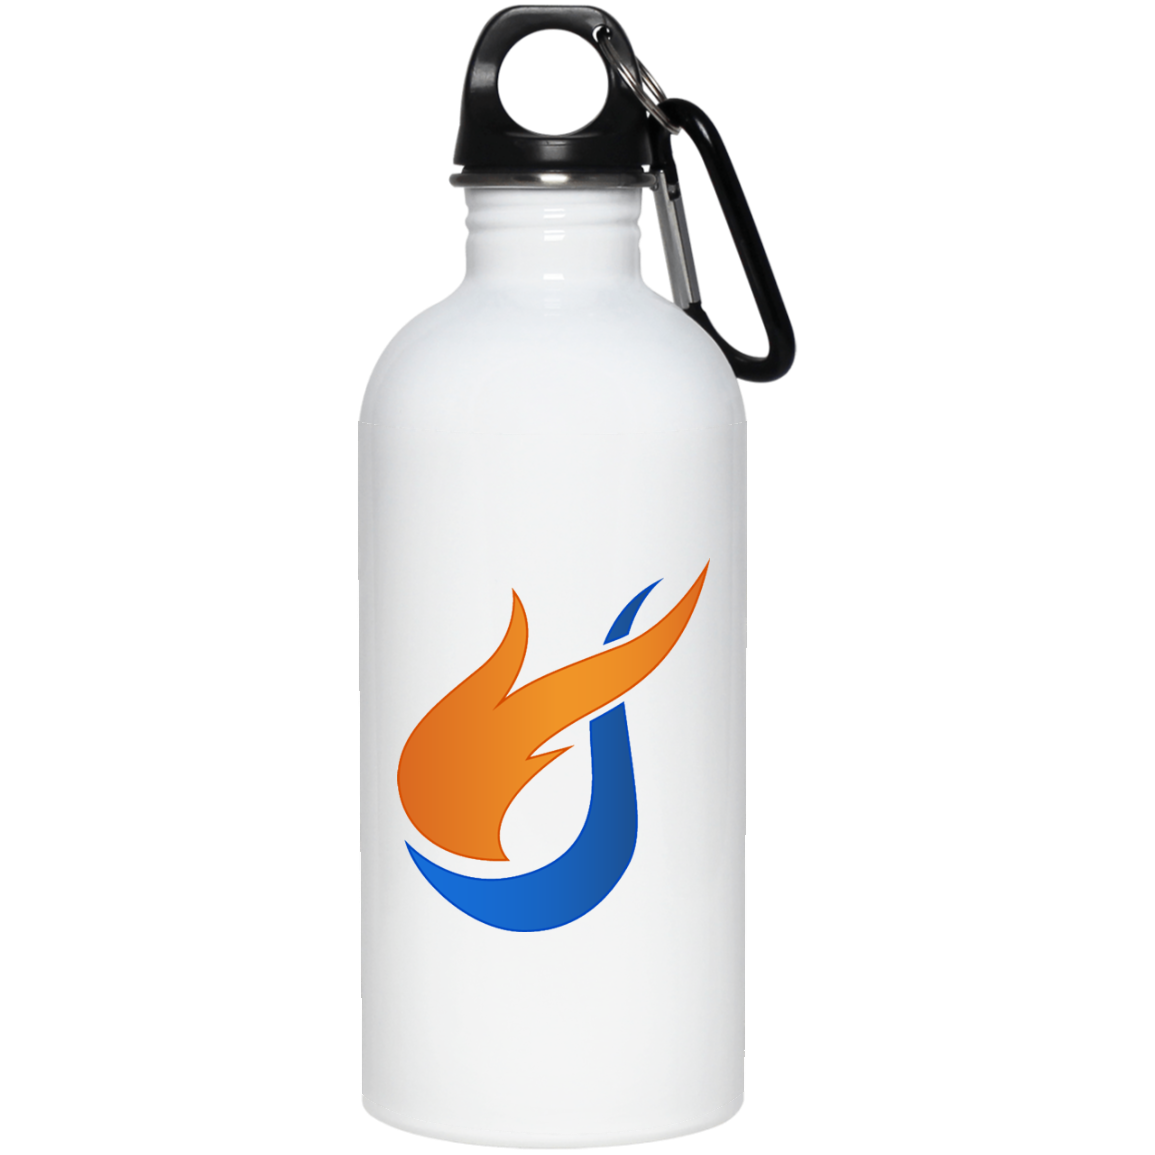 The Pentecostals Of Cooper City - 20 oz. Stainless Steel Water Bottle